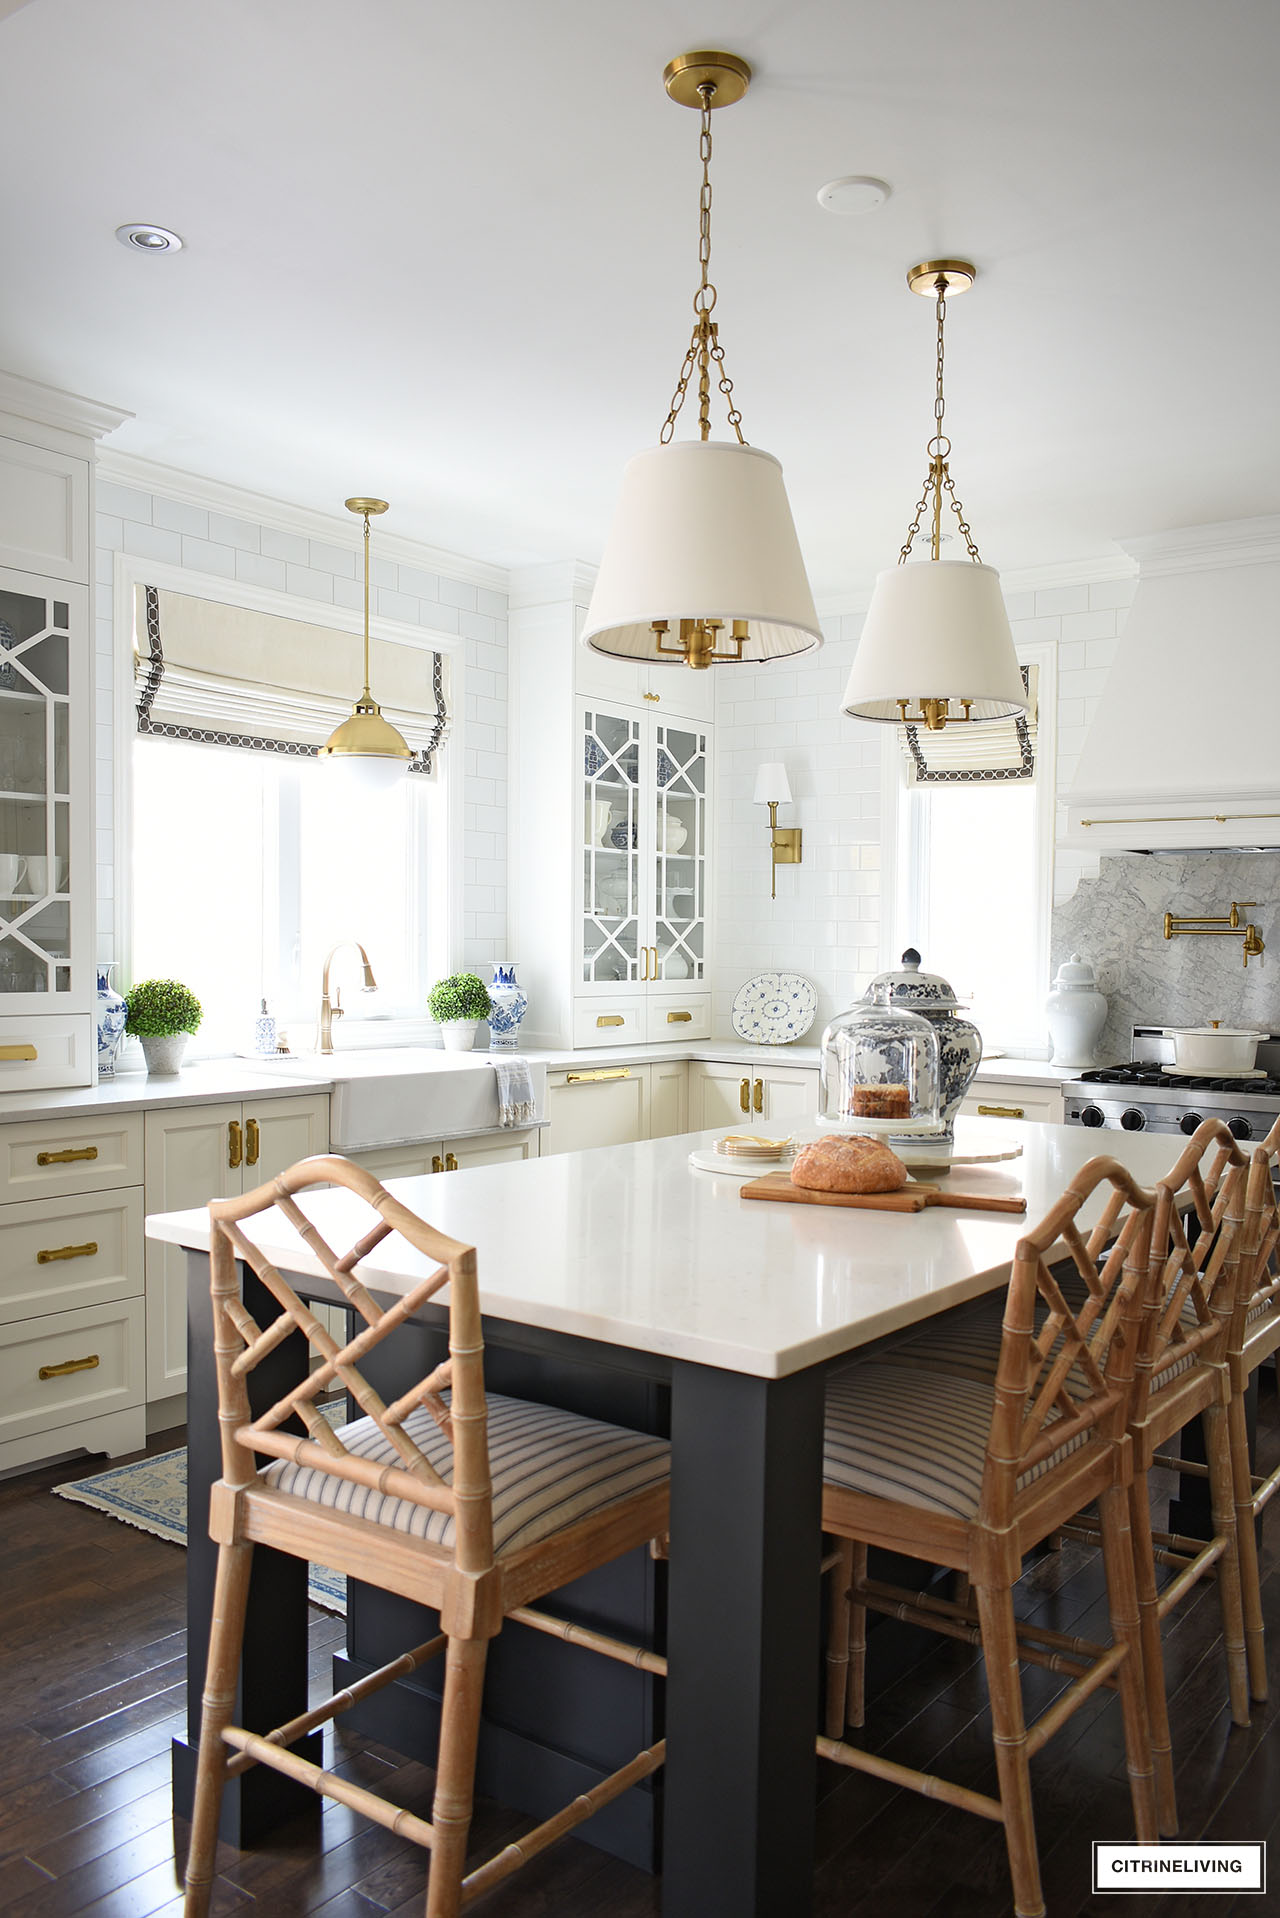 white kitchen with custom glass cabinet doors in a trellis/fretwork pattern and center island